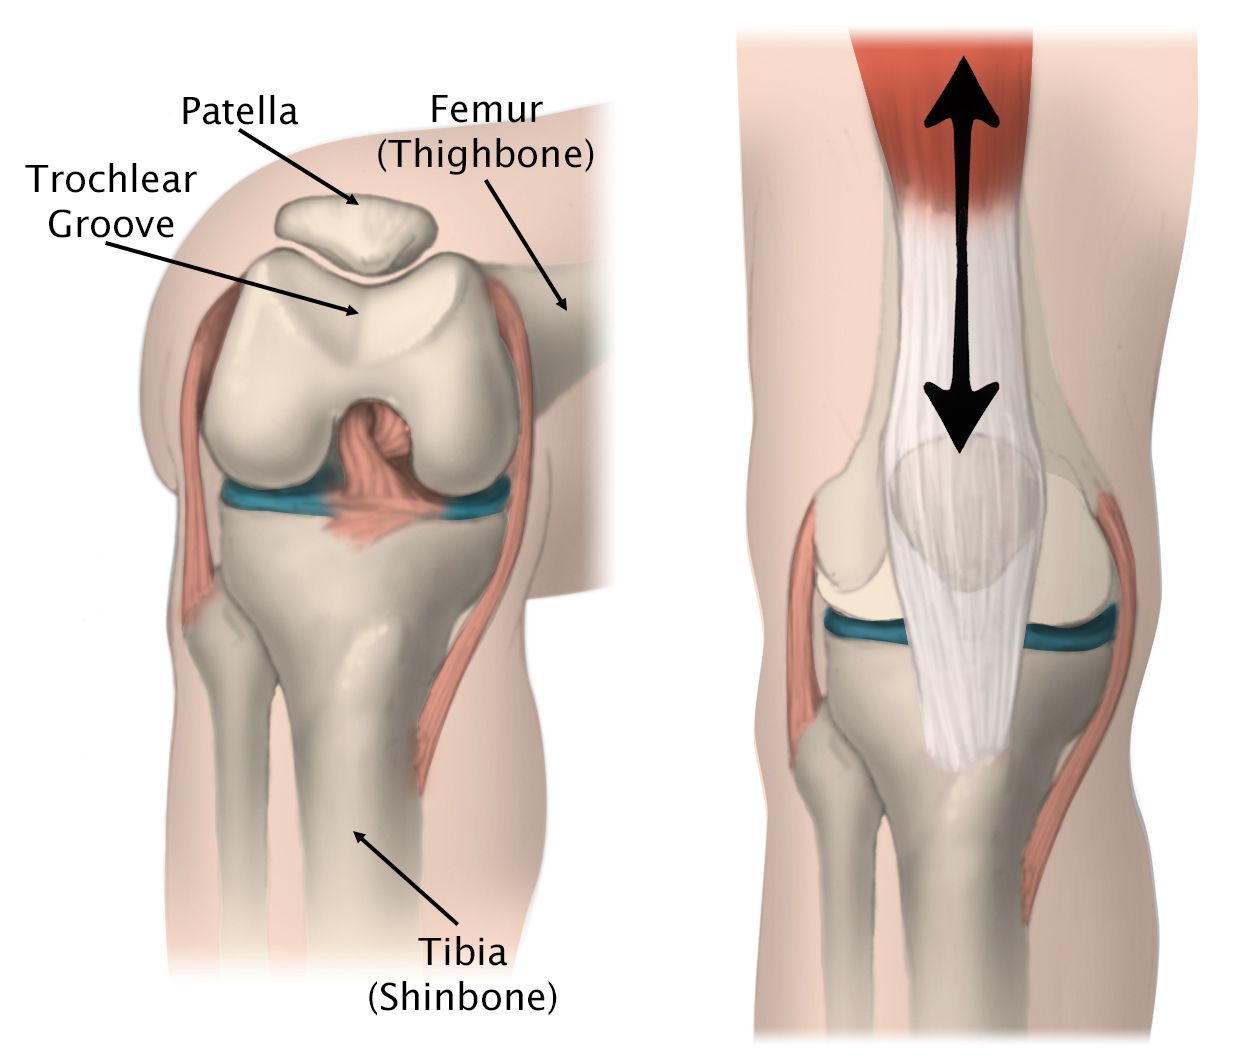 Illustration of the movement of the patella in the trochlear groove